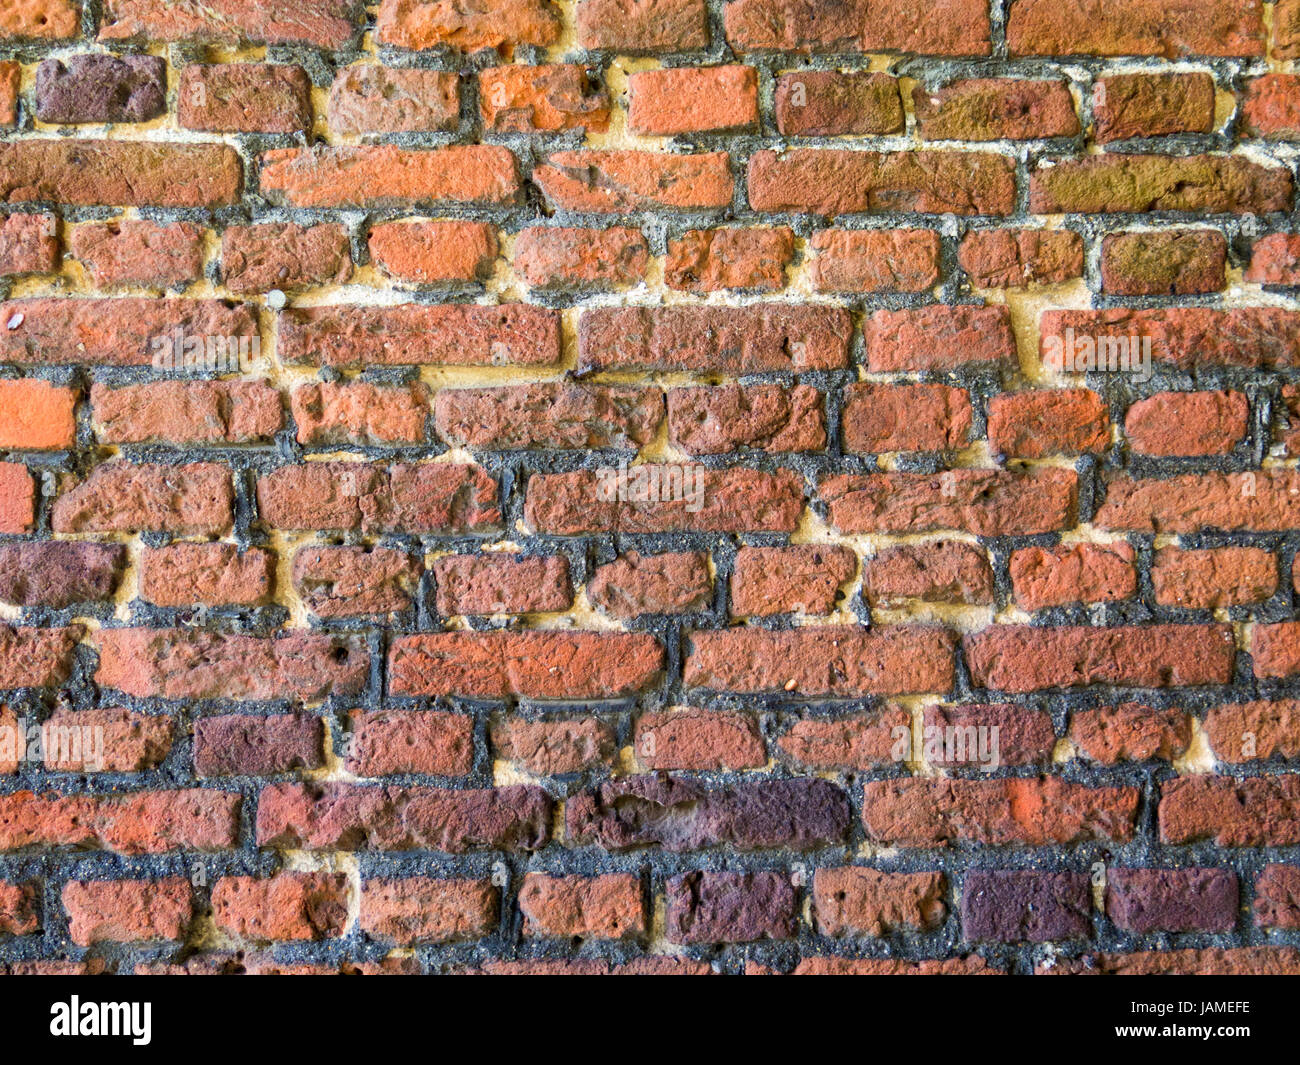 close-up of old brick wall with multiple layers of pointing repairs Stock Photo